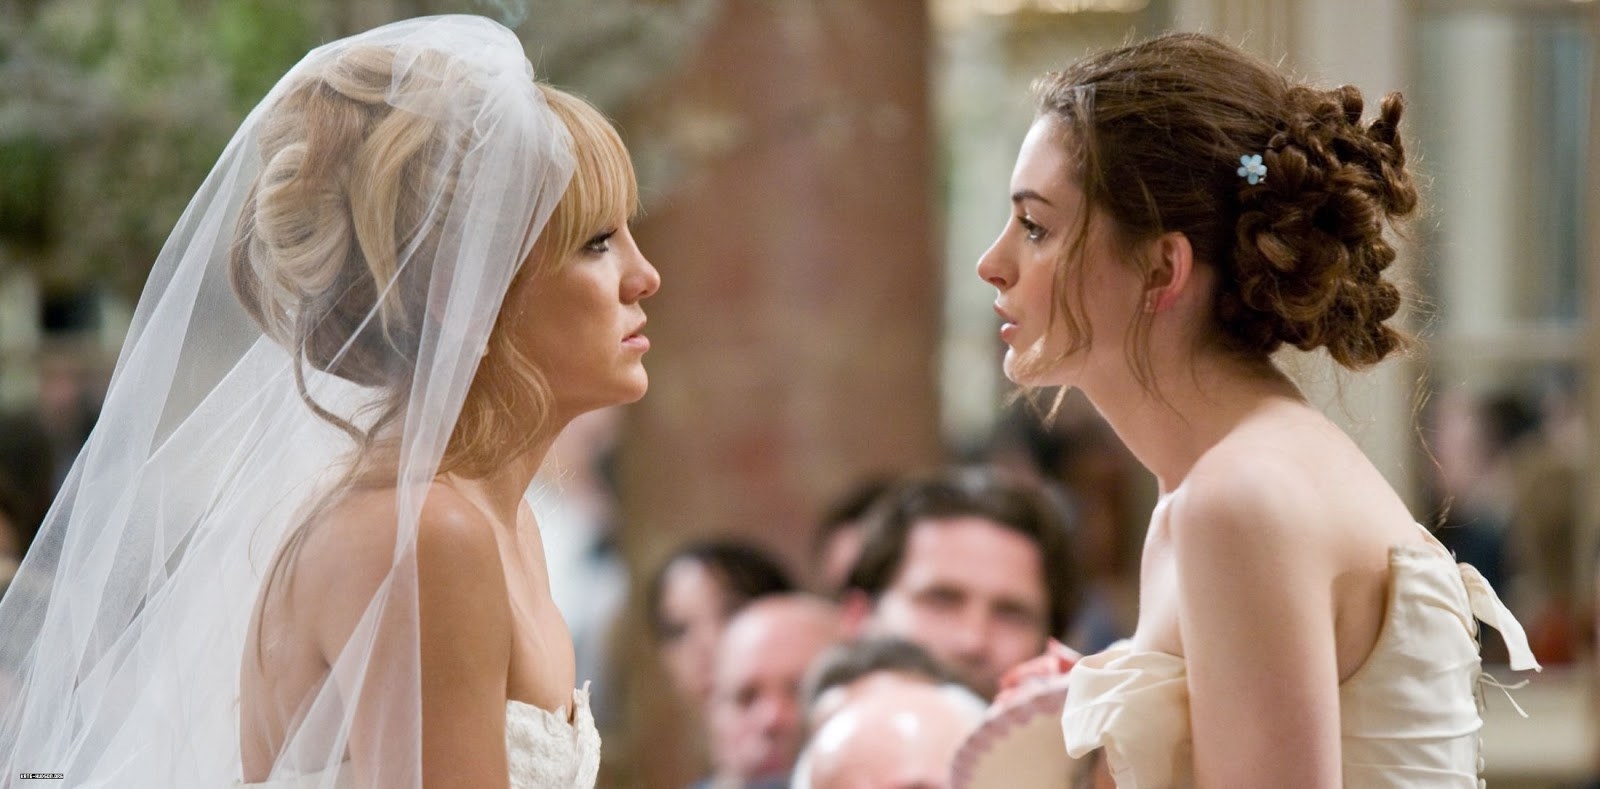 Kate Hudson and Anne Hathaway talk to each other in wedding dresses